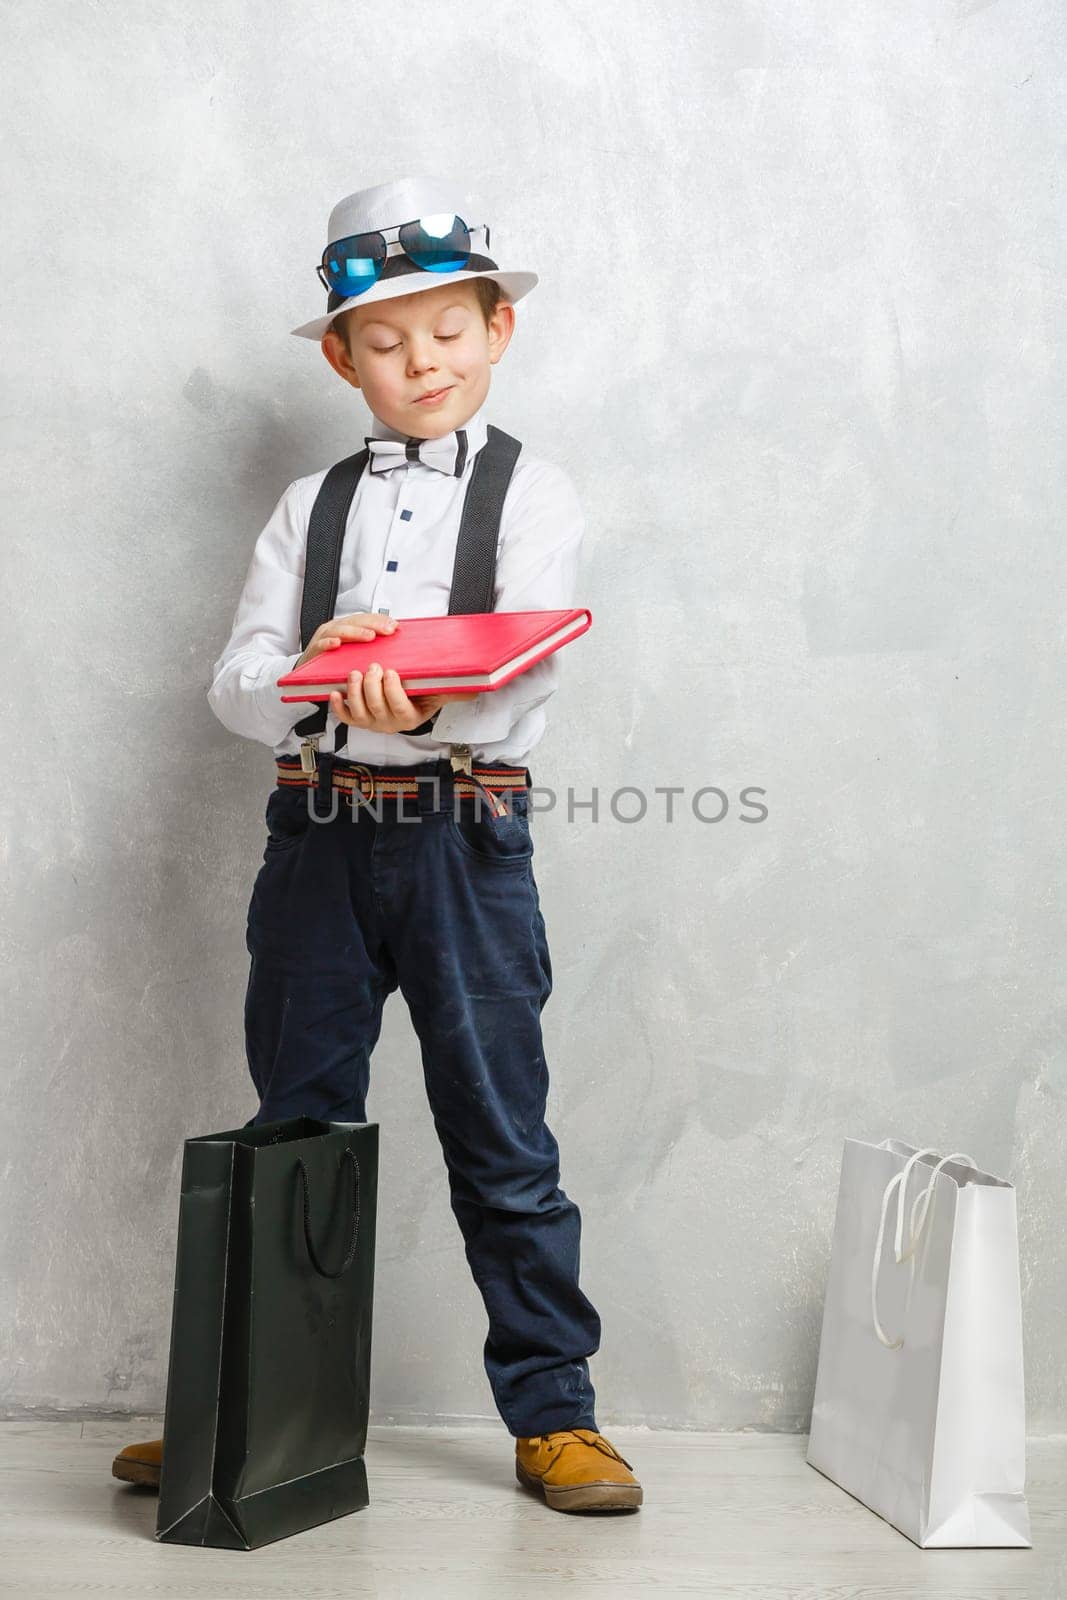 little schoolboy with a book on gray color background.